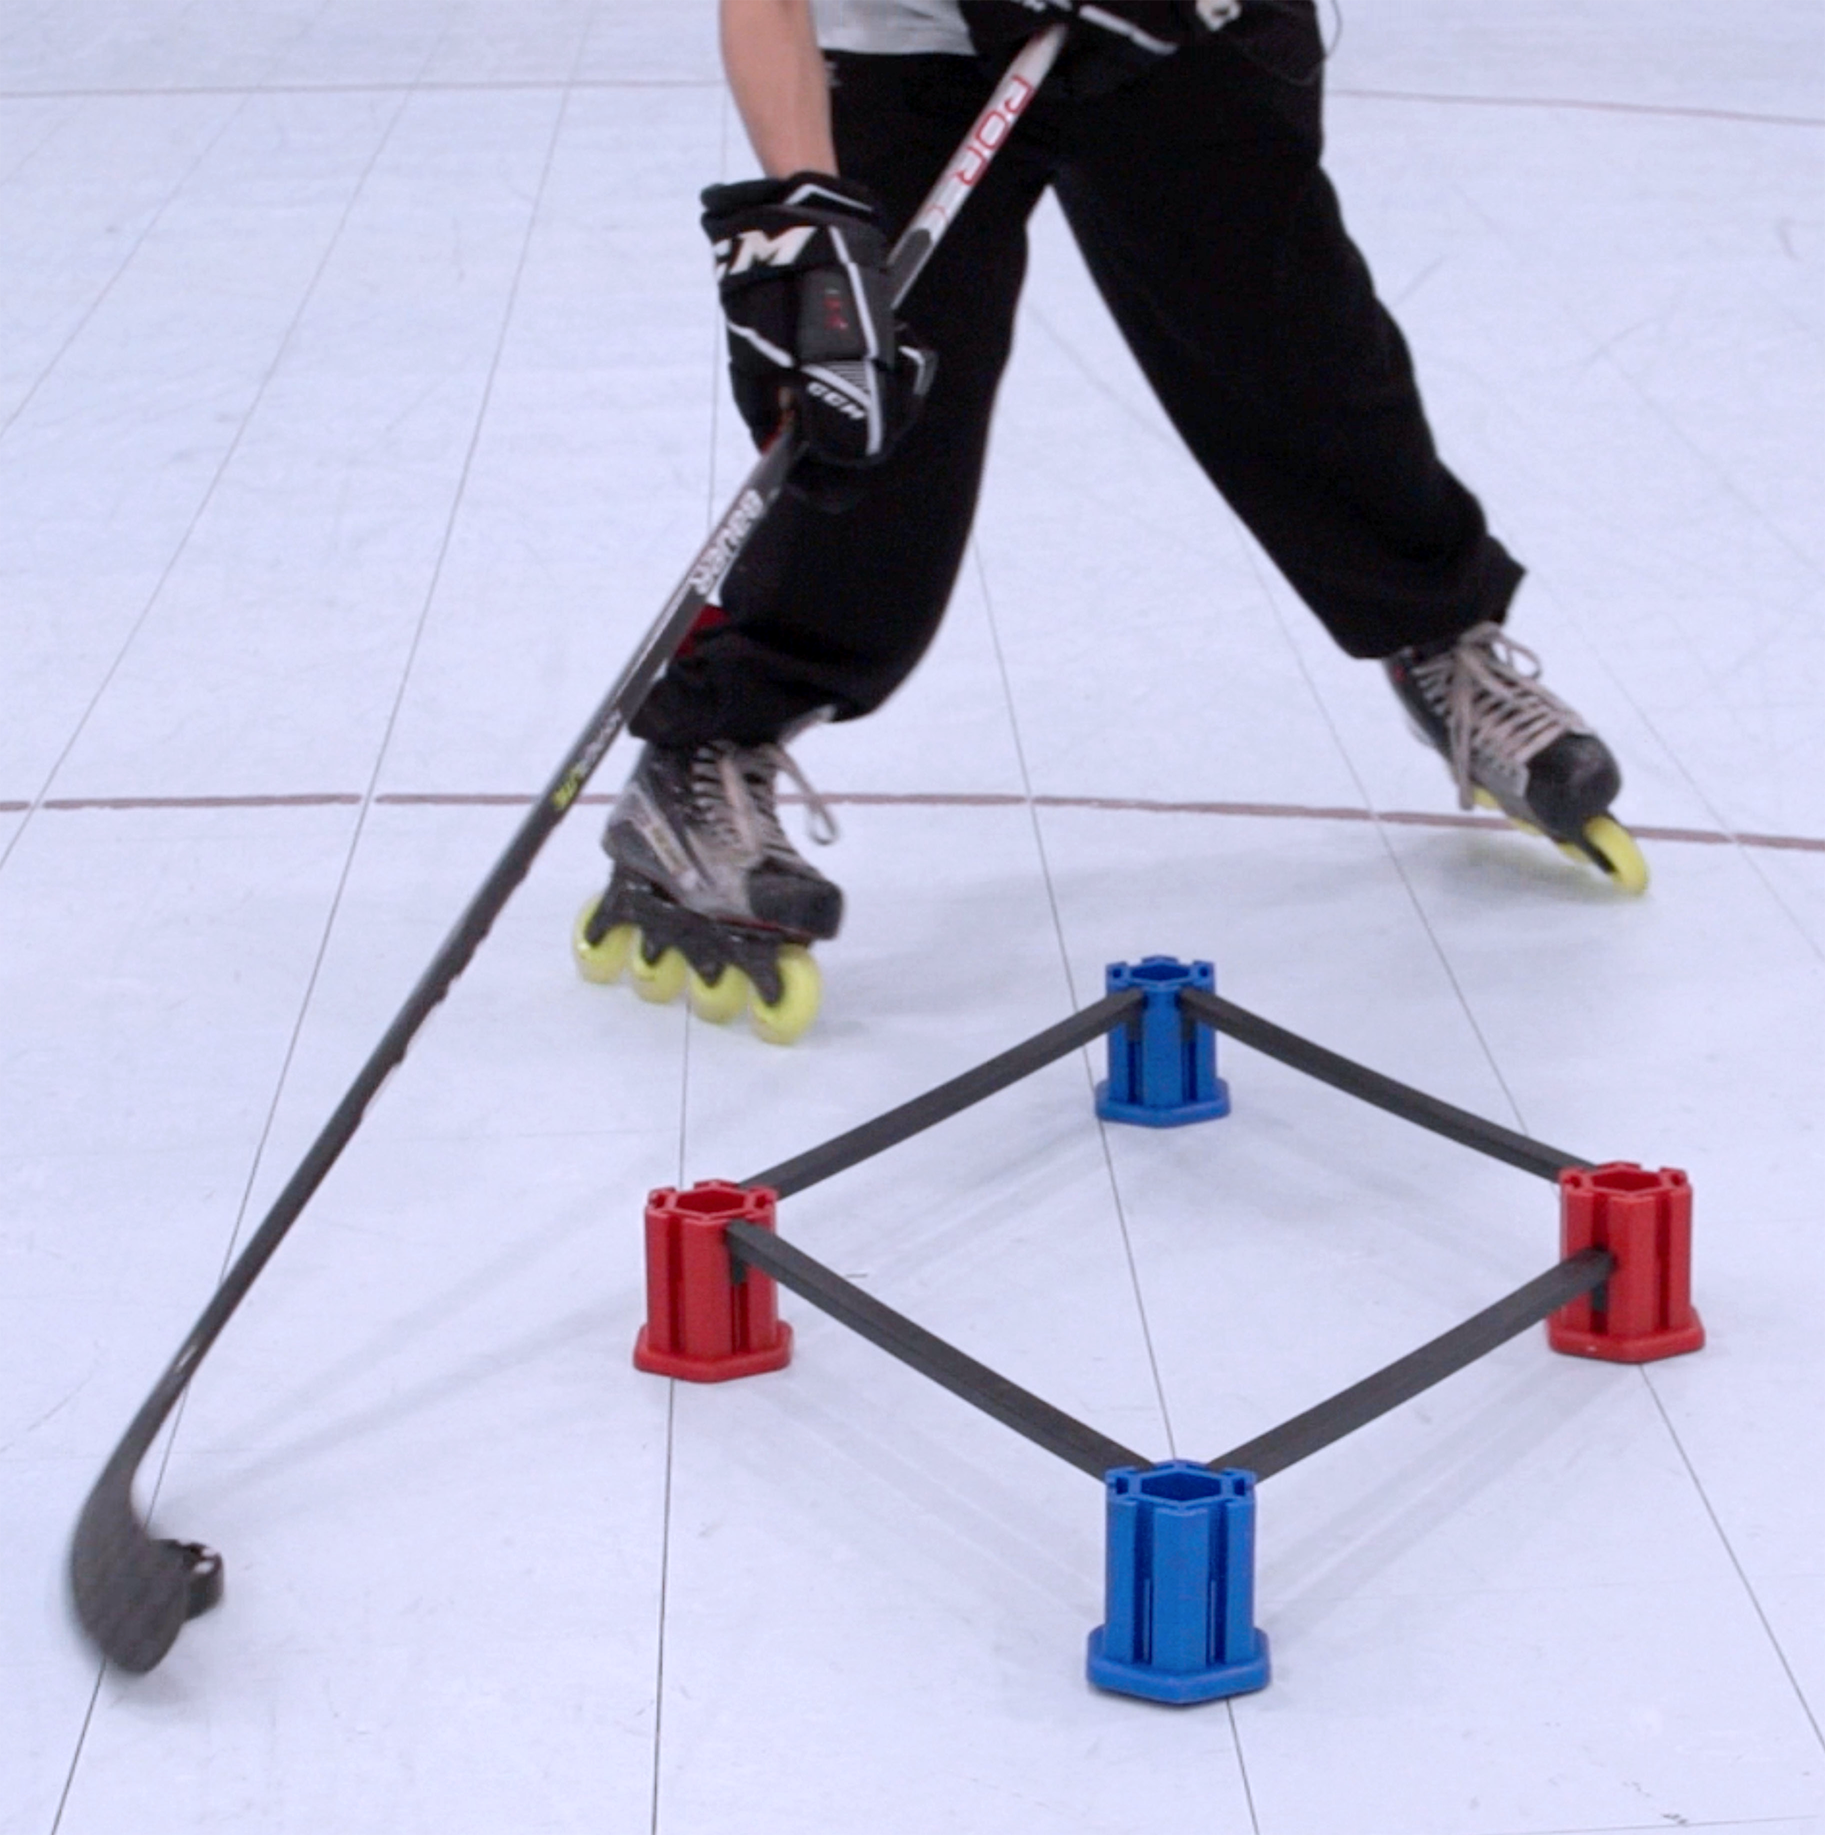 Required Equipment - Fraser Roller Hockey League